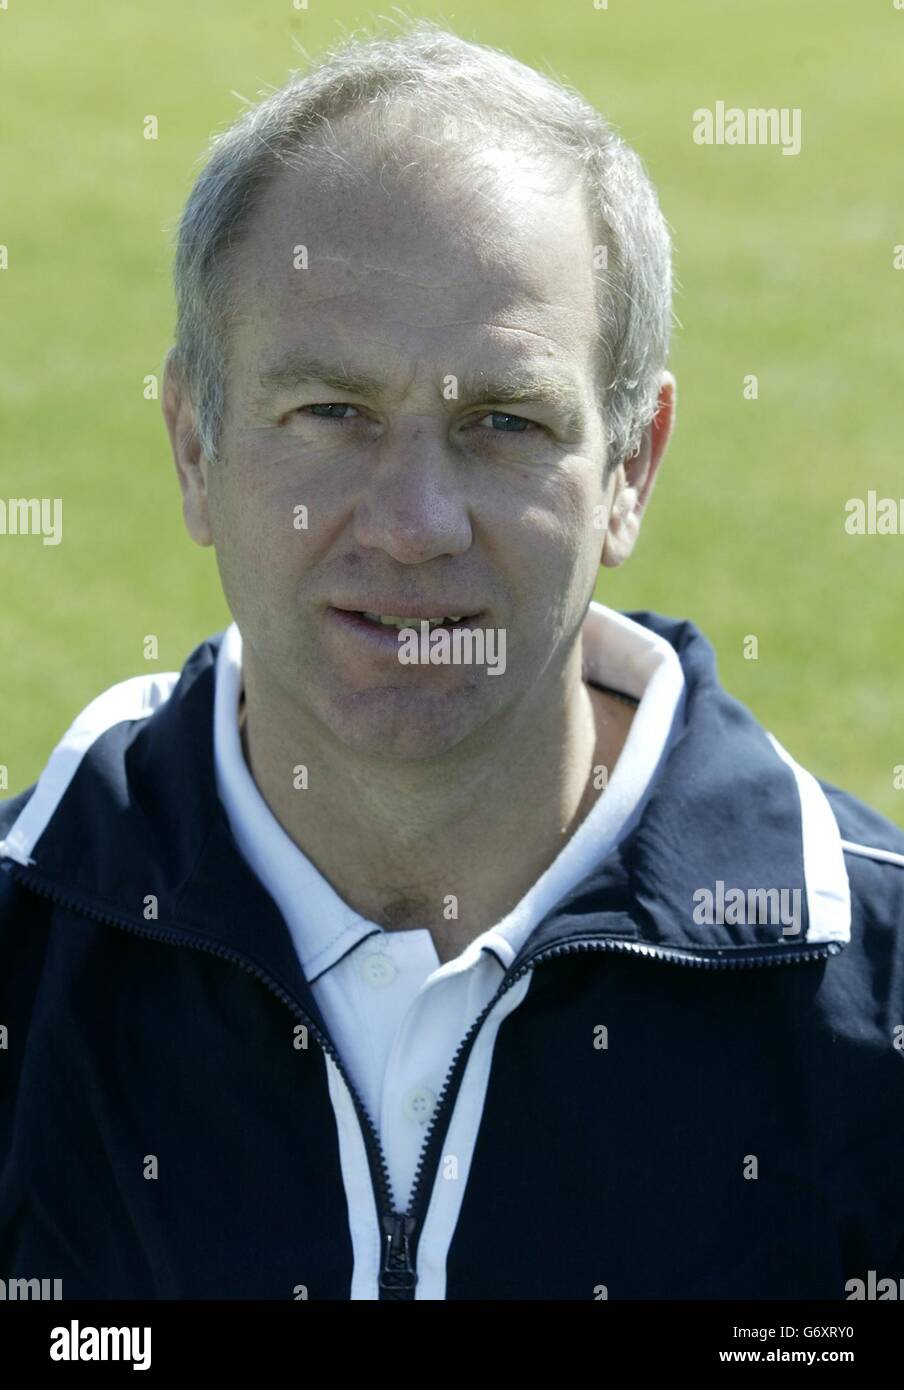 Andy Stovold , Director of Development and Operations of Gloucestershire County Cricket Club during a photocall at Bristol, ahead of the new 2004 season. Stock Photo